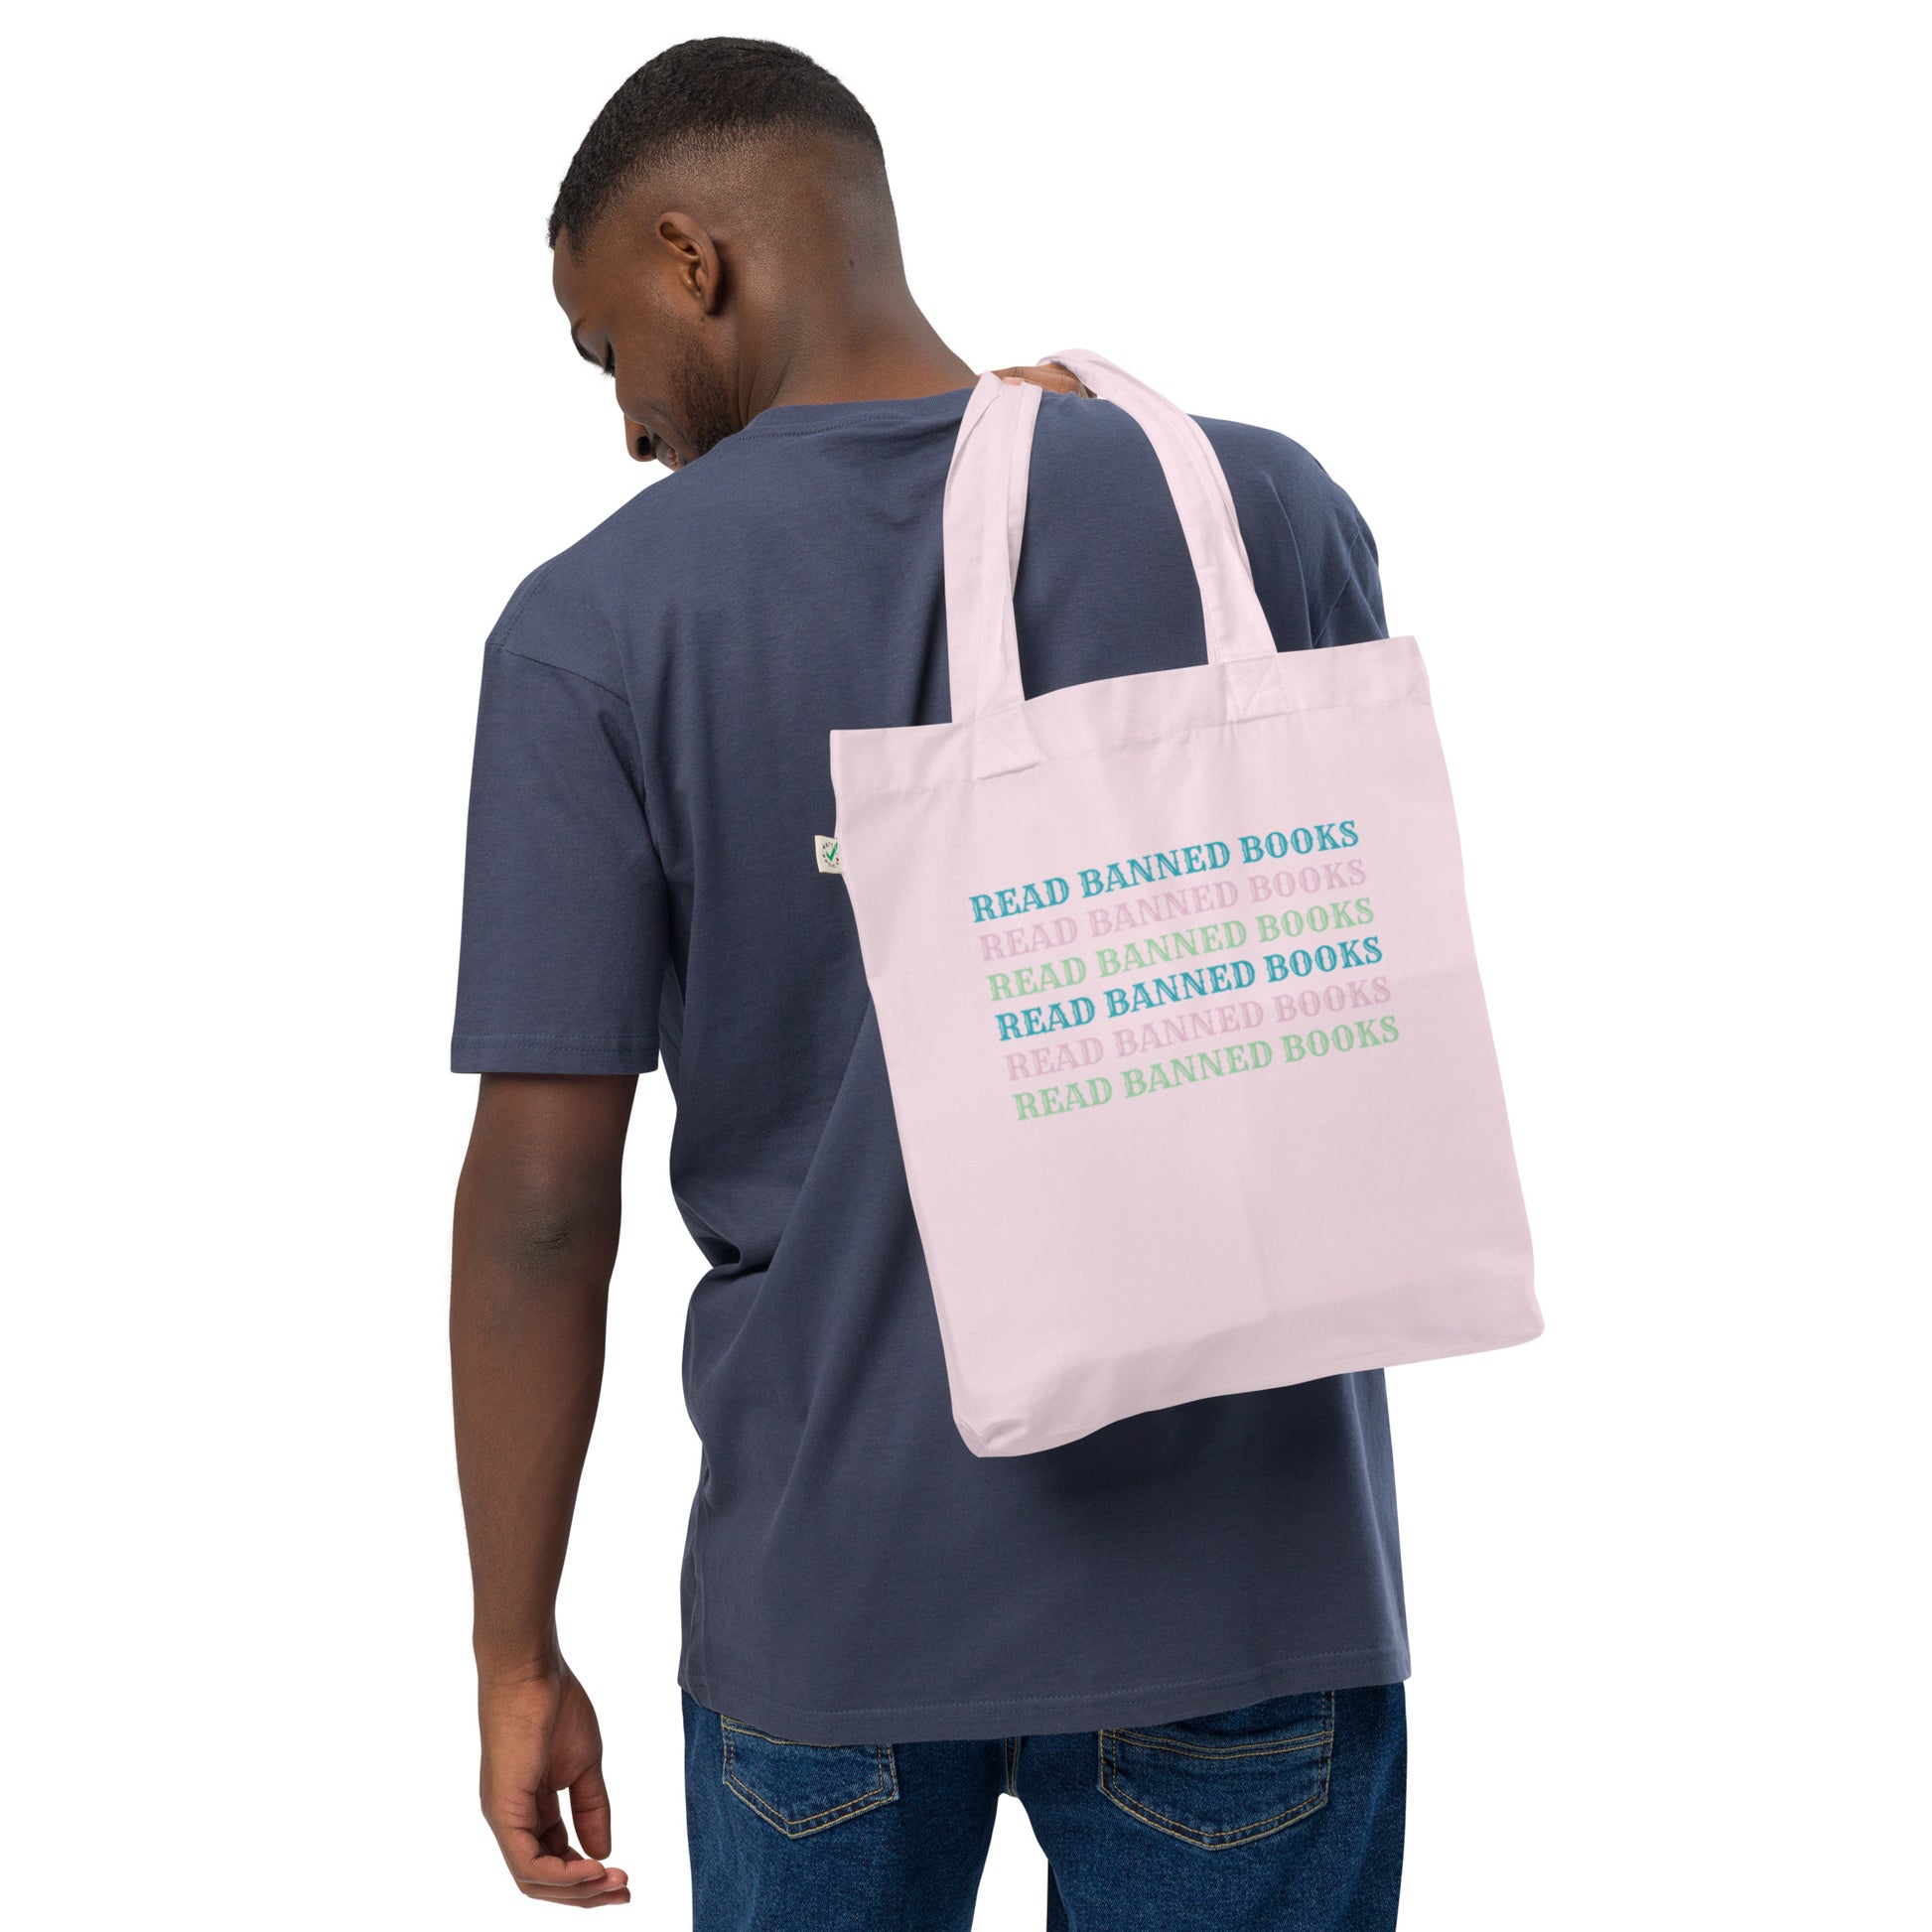 Read Banned Books Organic Fashion Tote Bag - The Spinster Librarian Shop